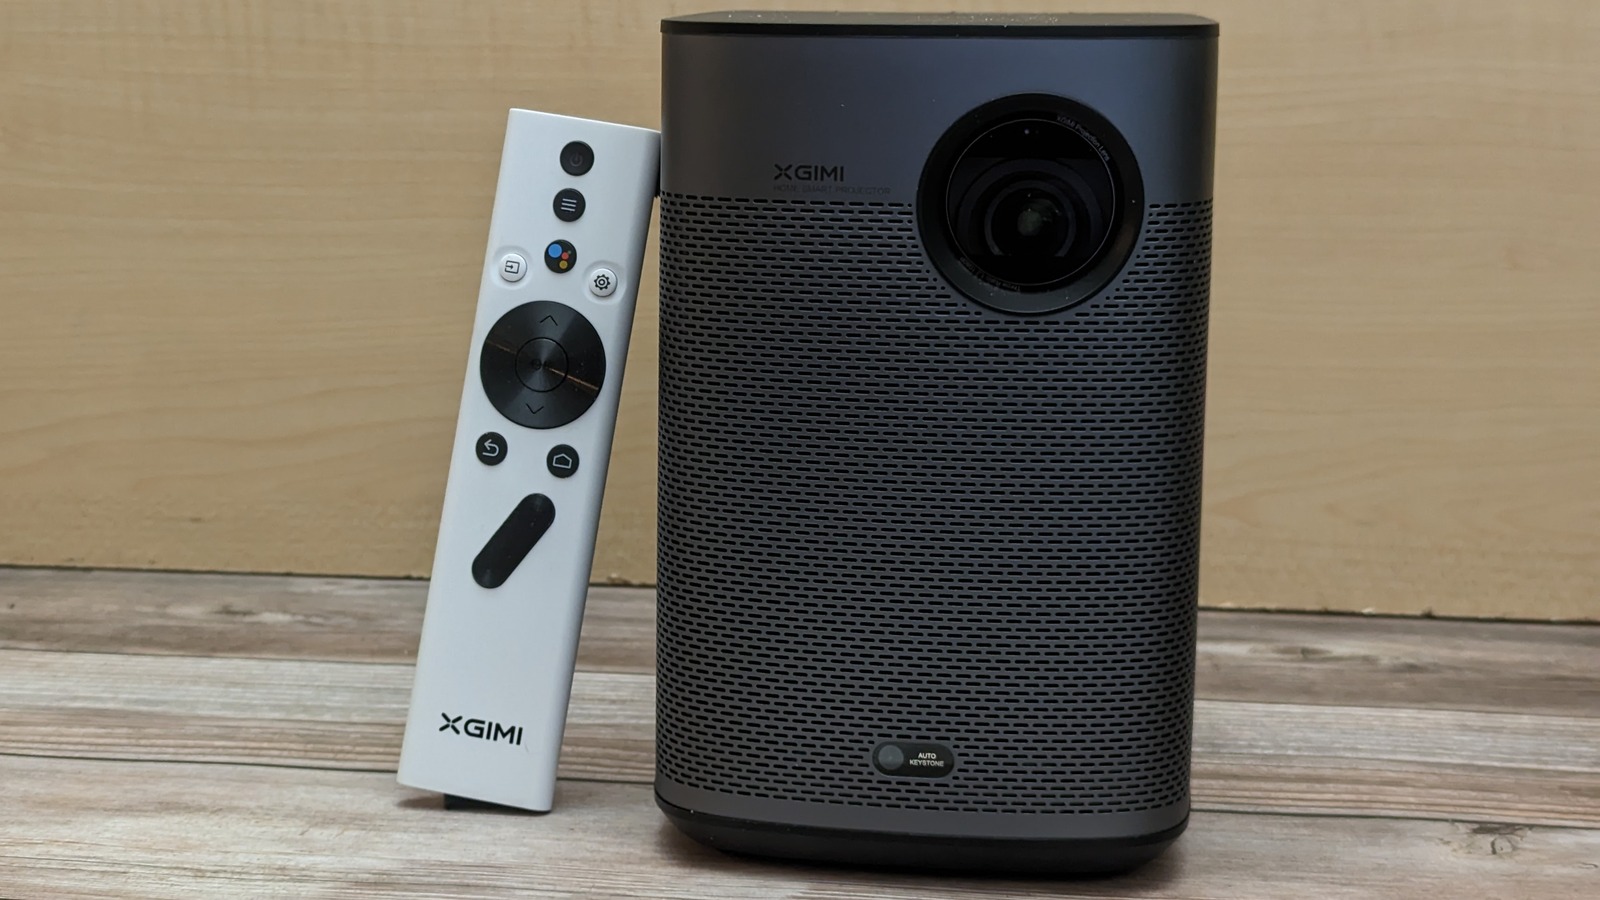 Xgimi Halo Plus Review: Perfectly TV Smart Portable Projector